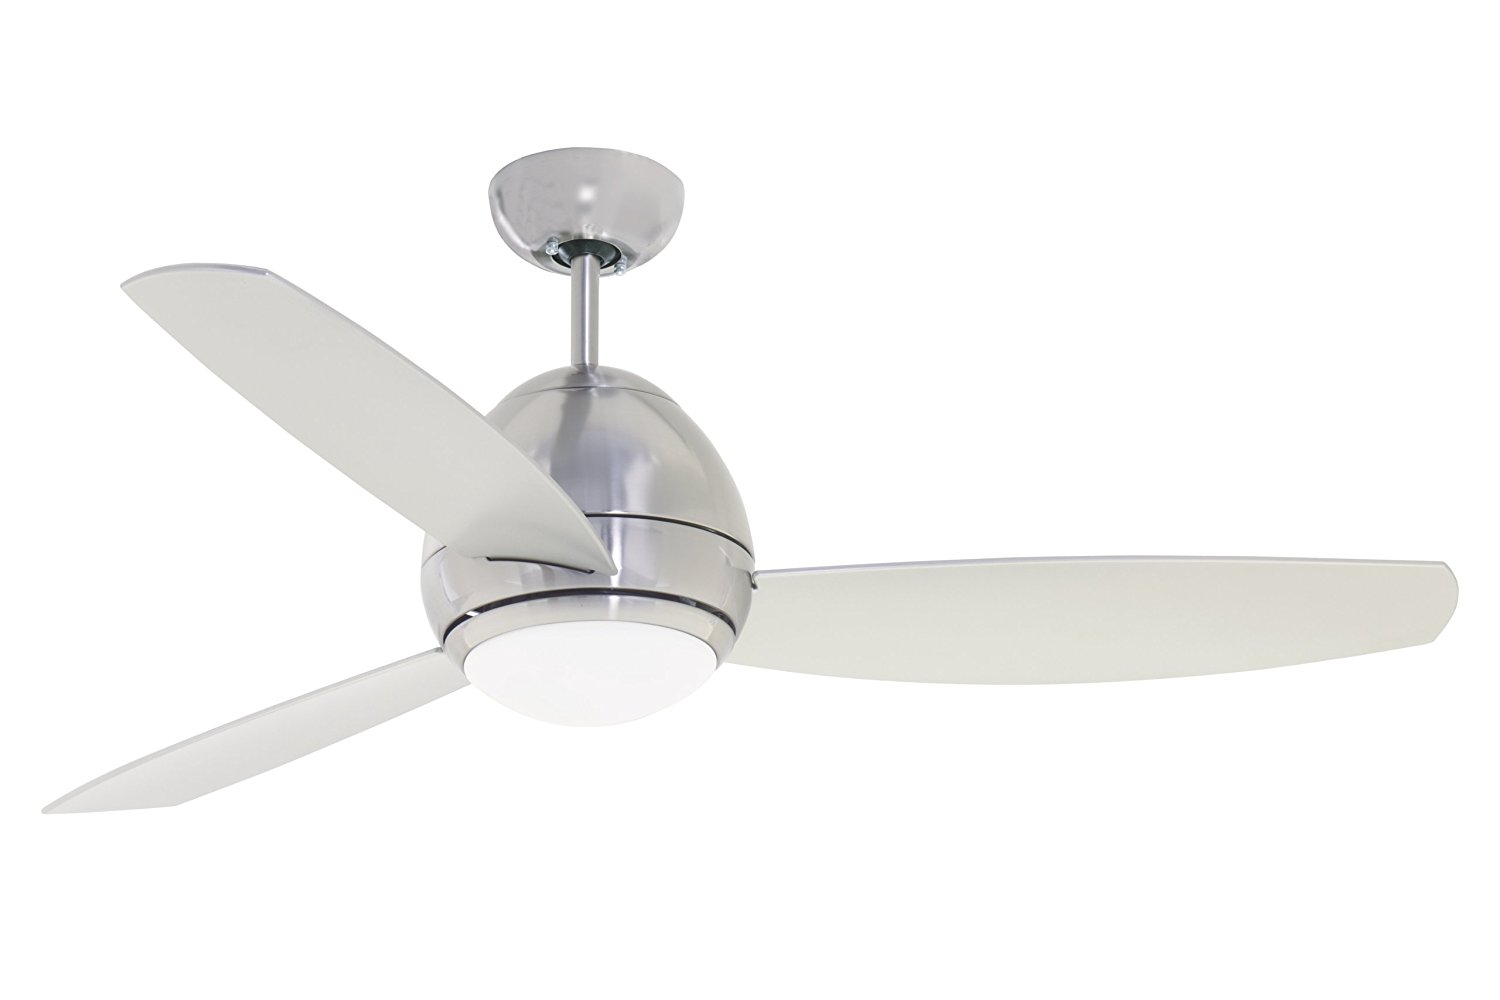 Emerson Ceiling Fans CF244BS, Curva, Modern Indoor Outdoor Ceiling Fan With Light And Remote, Wet Rated, 44-Inch Blades, Brushed Steel Finish